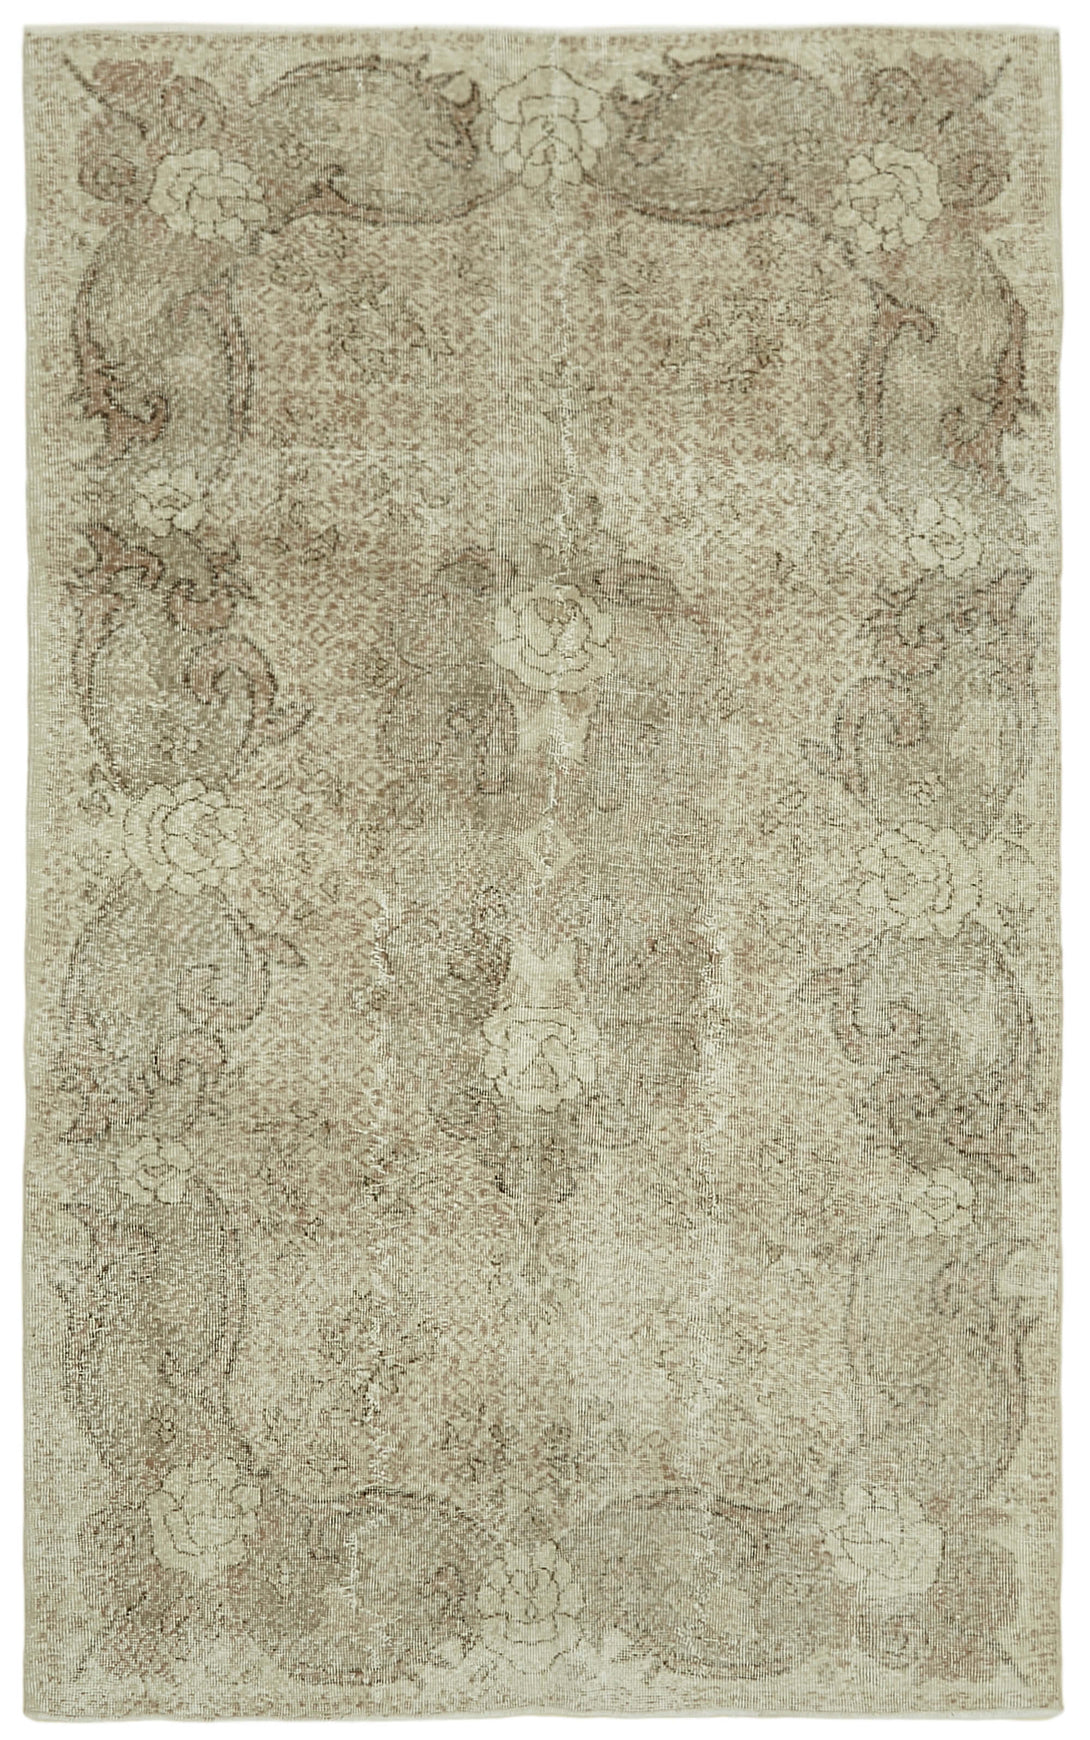 Handmade White Wash Area Rug > Design# OL-AC-41548 > Size: 5'-5" x 8'-8", Carpet Culture Rugs, Handmade Rugs, NYC Rugs, New Rugs, Shop Rugs, Rug Store, Outlet Rugs, SoHo Rugs, Rugs in USA